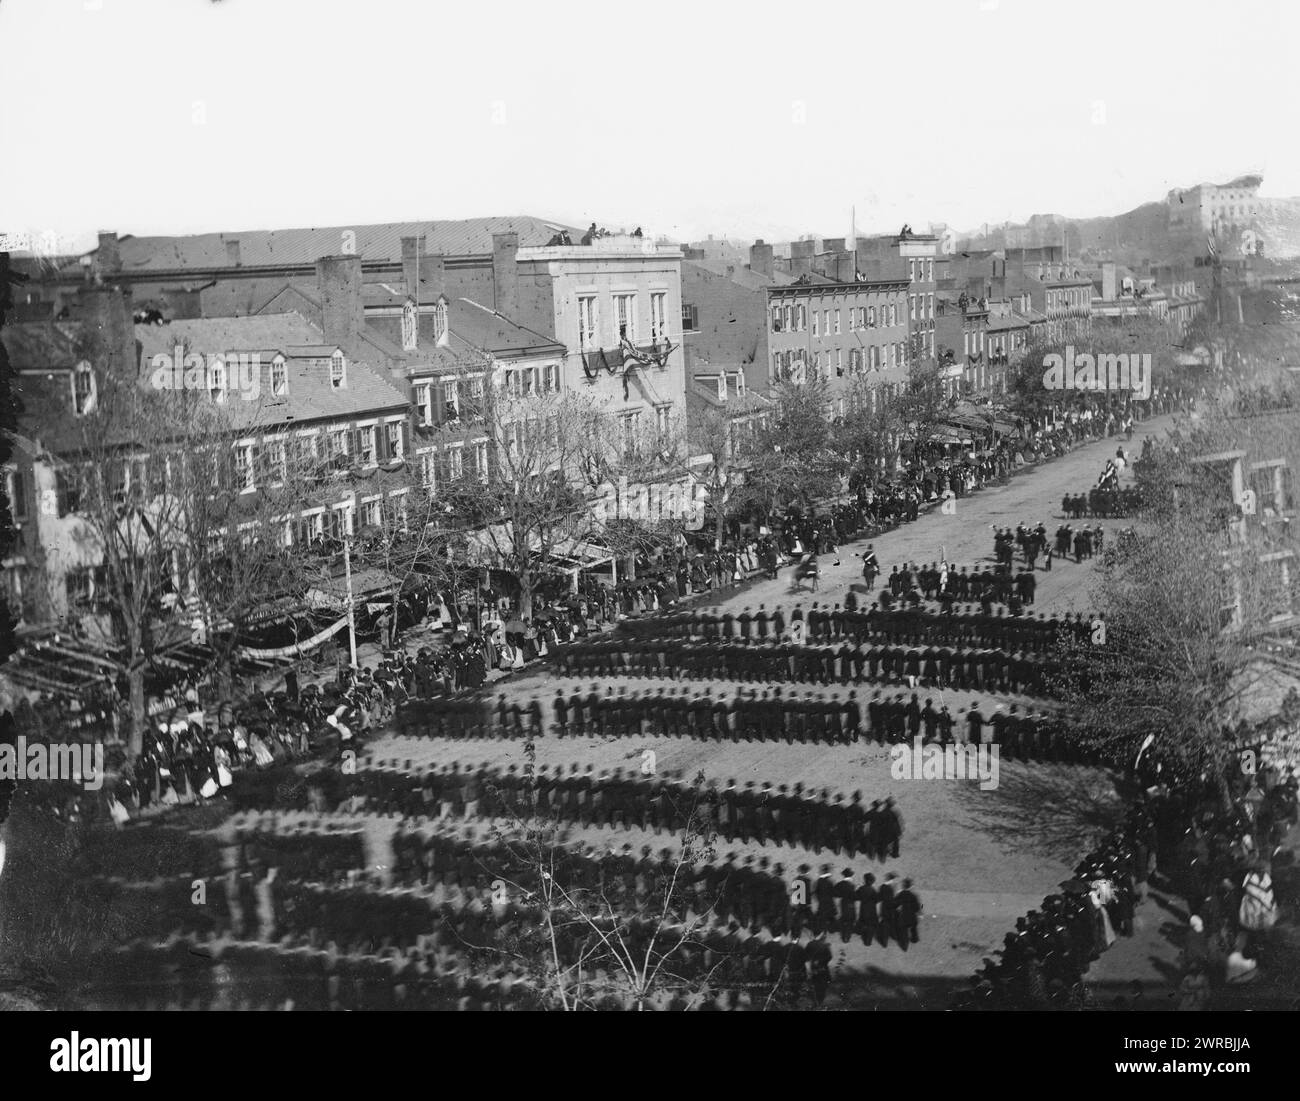 Washington, D.C. President Lincoln's funeral procession on Pennsylvania Avenue, Photograph of Washington, 1862-1865, the assassination of President Lincoln, April-July 1865., 1865 April 19., United States, History, Civil War, 1861-1865, Glass negatives, 1860-1870, Stereographs, 1860-1870, 1 negative: glass, stereograph, wet collodion, 4 x 10 in Stock Photo